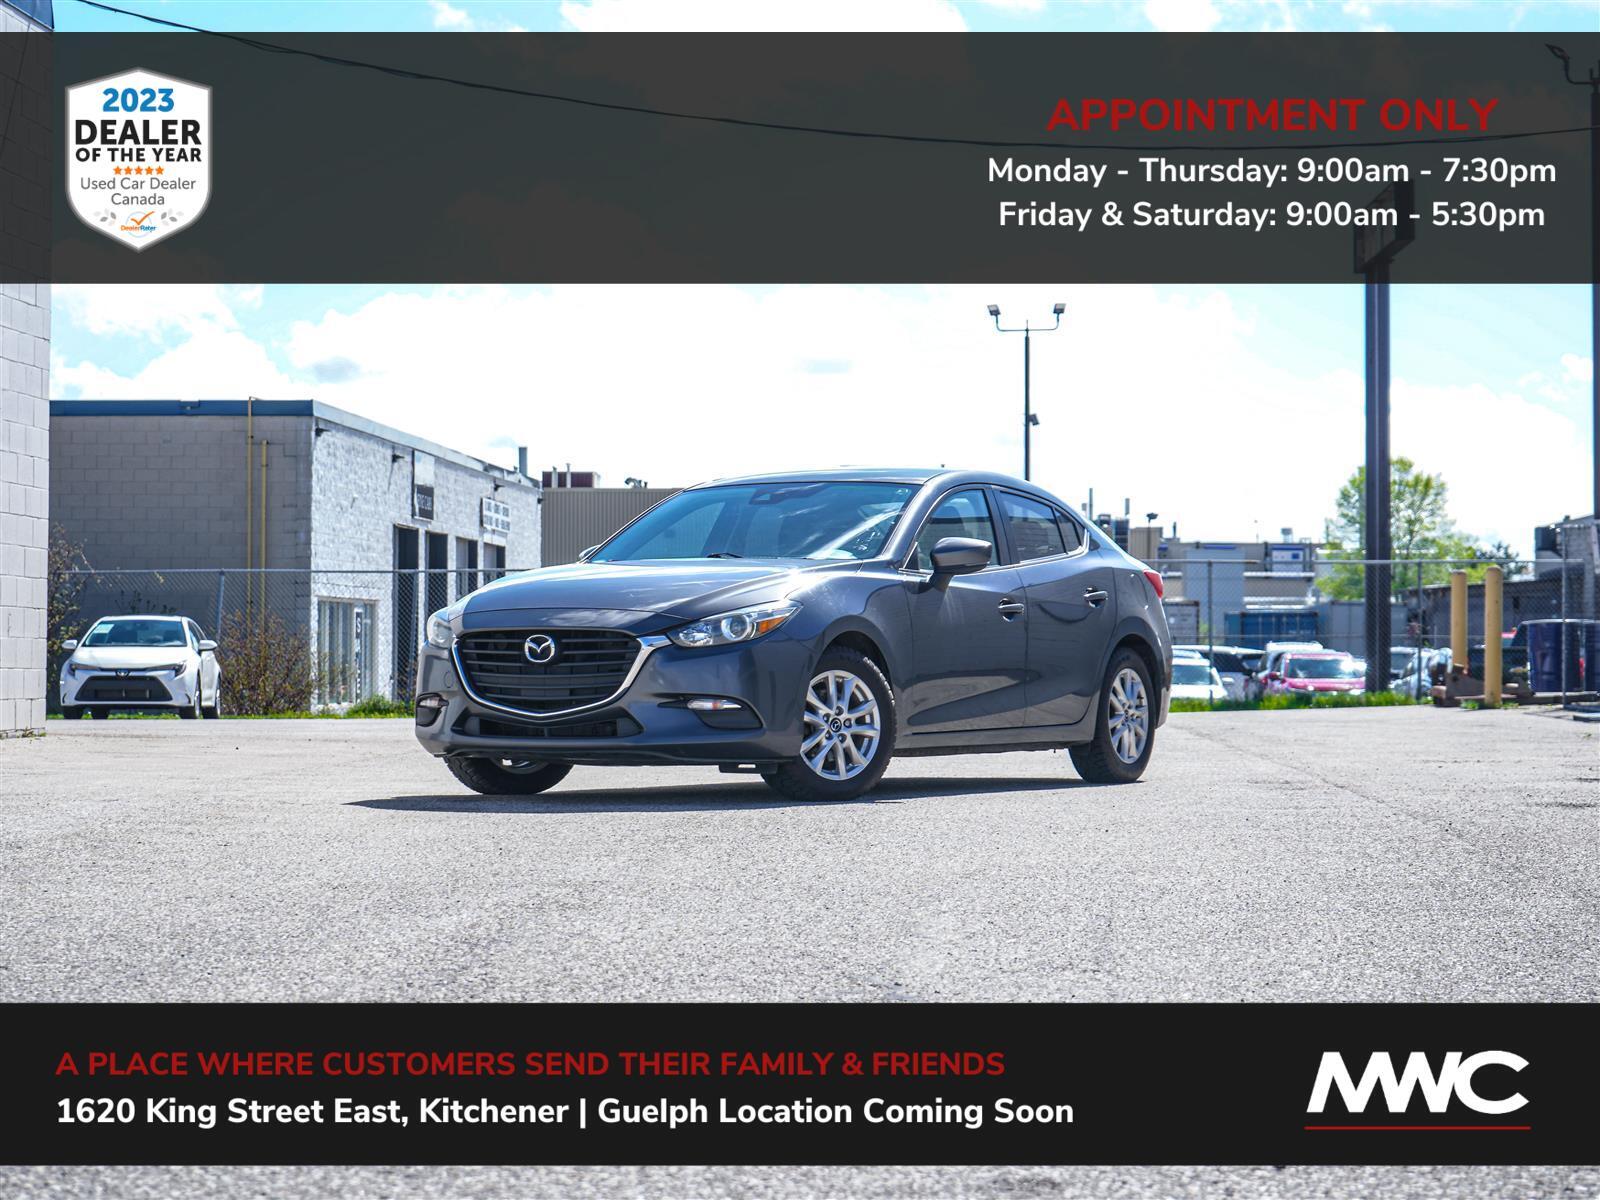 2017 Mazda Mazda3 GS | IN GUELPH, BY APPT. ONLY